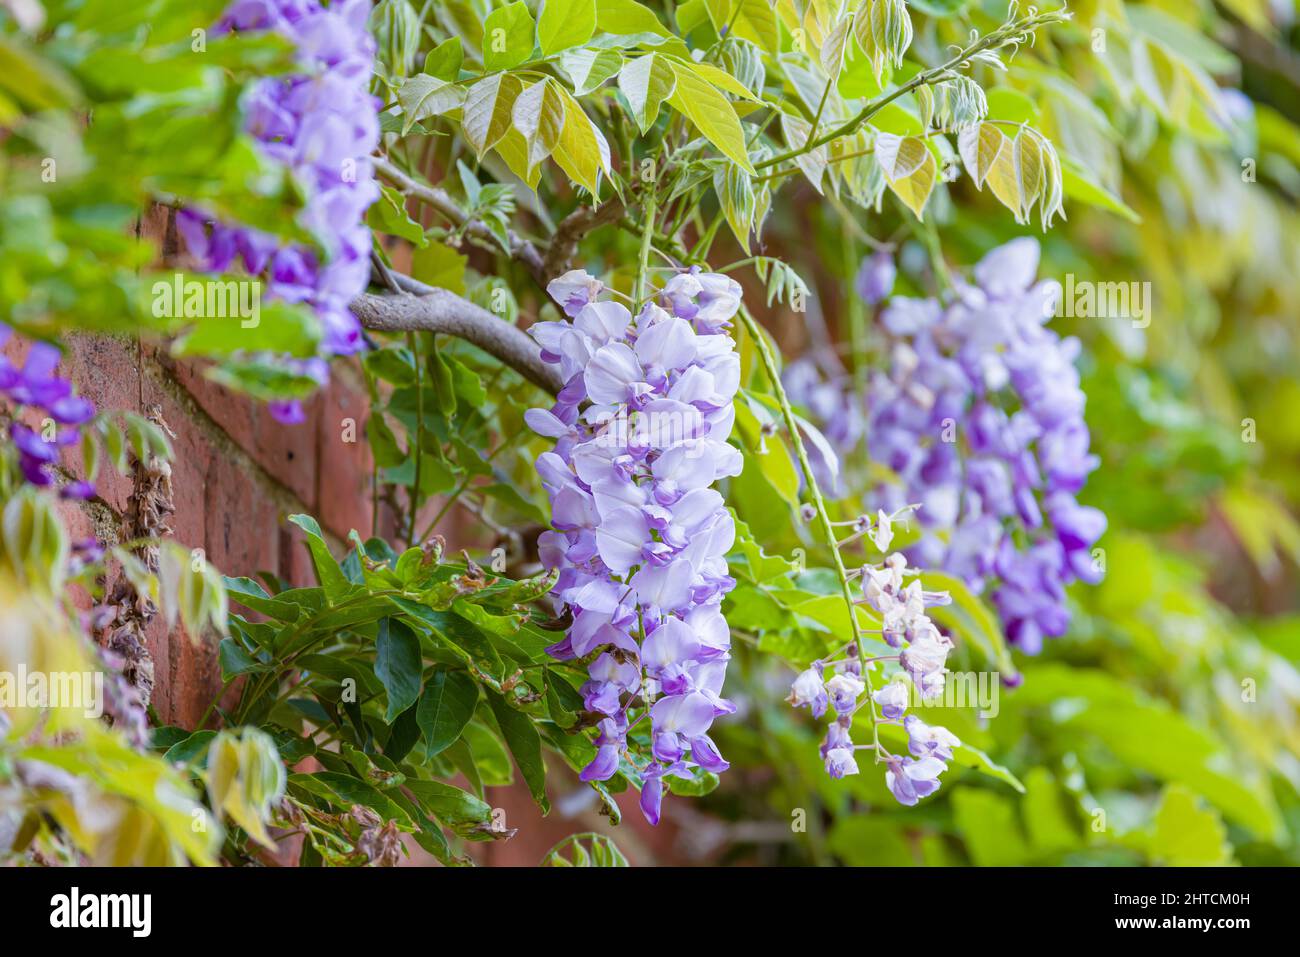 Wisteria flowers (racemes). Vines of a climbing wisteria plant or tree growing on a house wall in spring, UK. Stock Photo